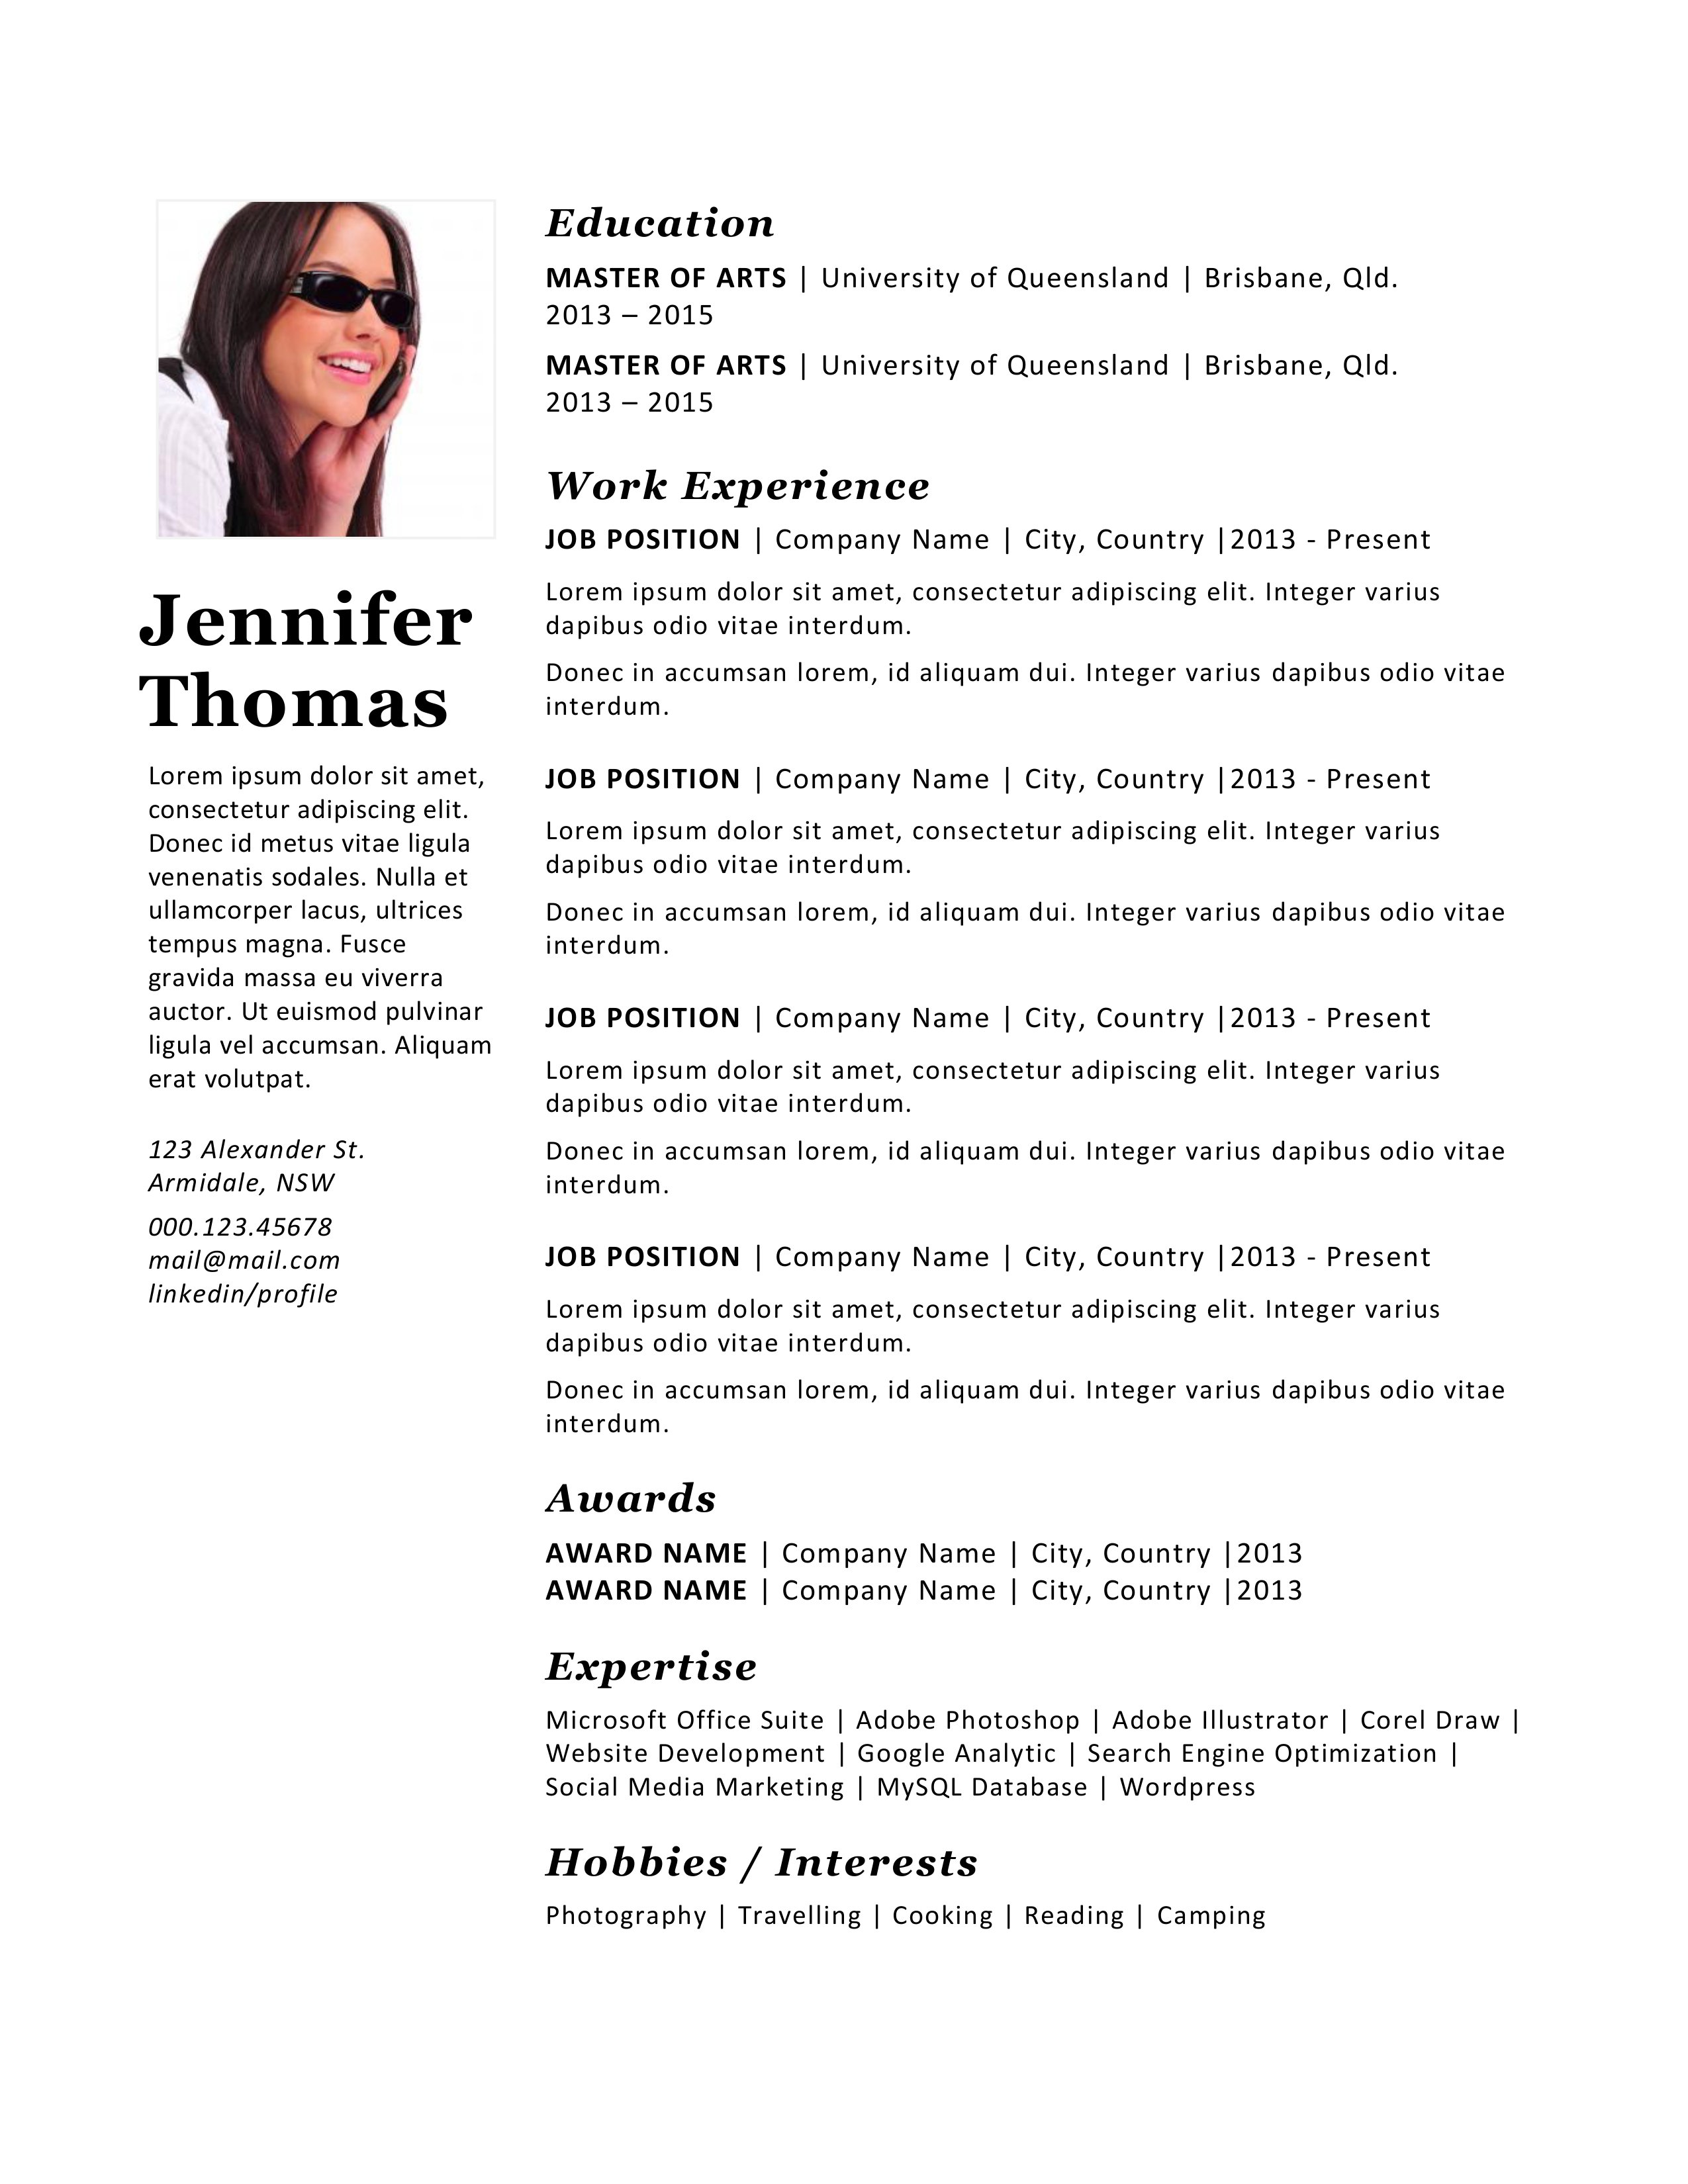 Professional resume is shown in this image.